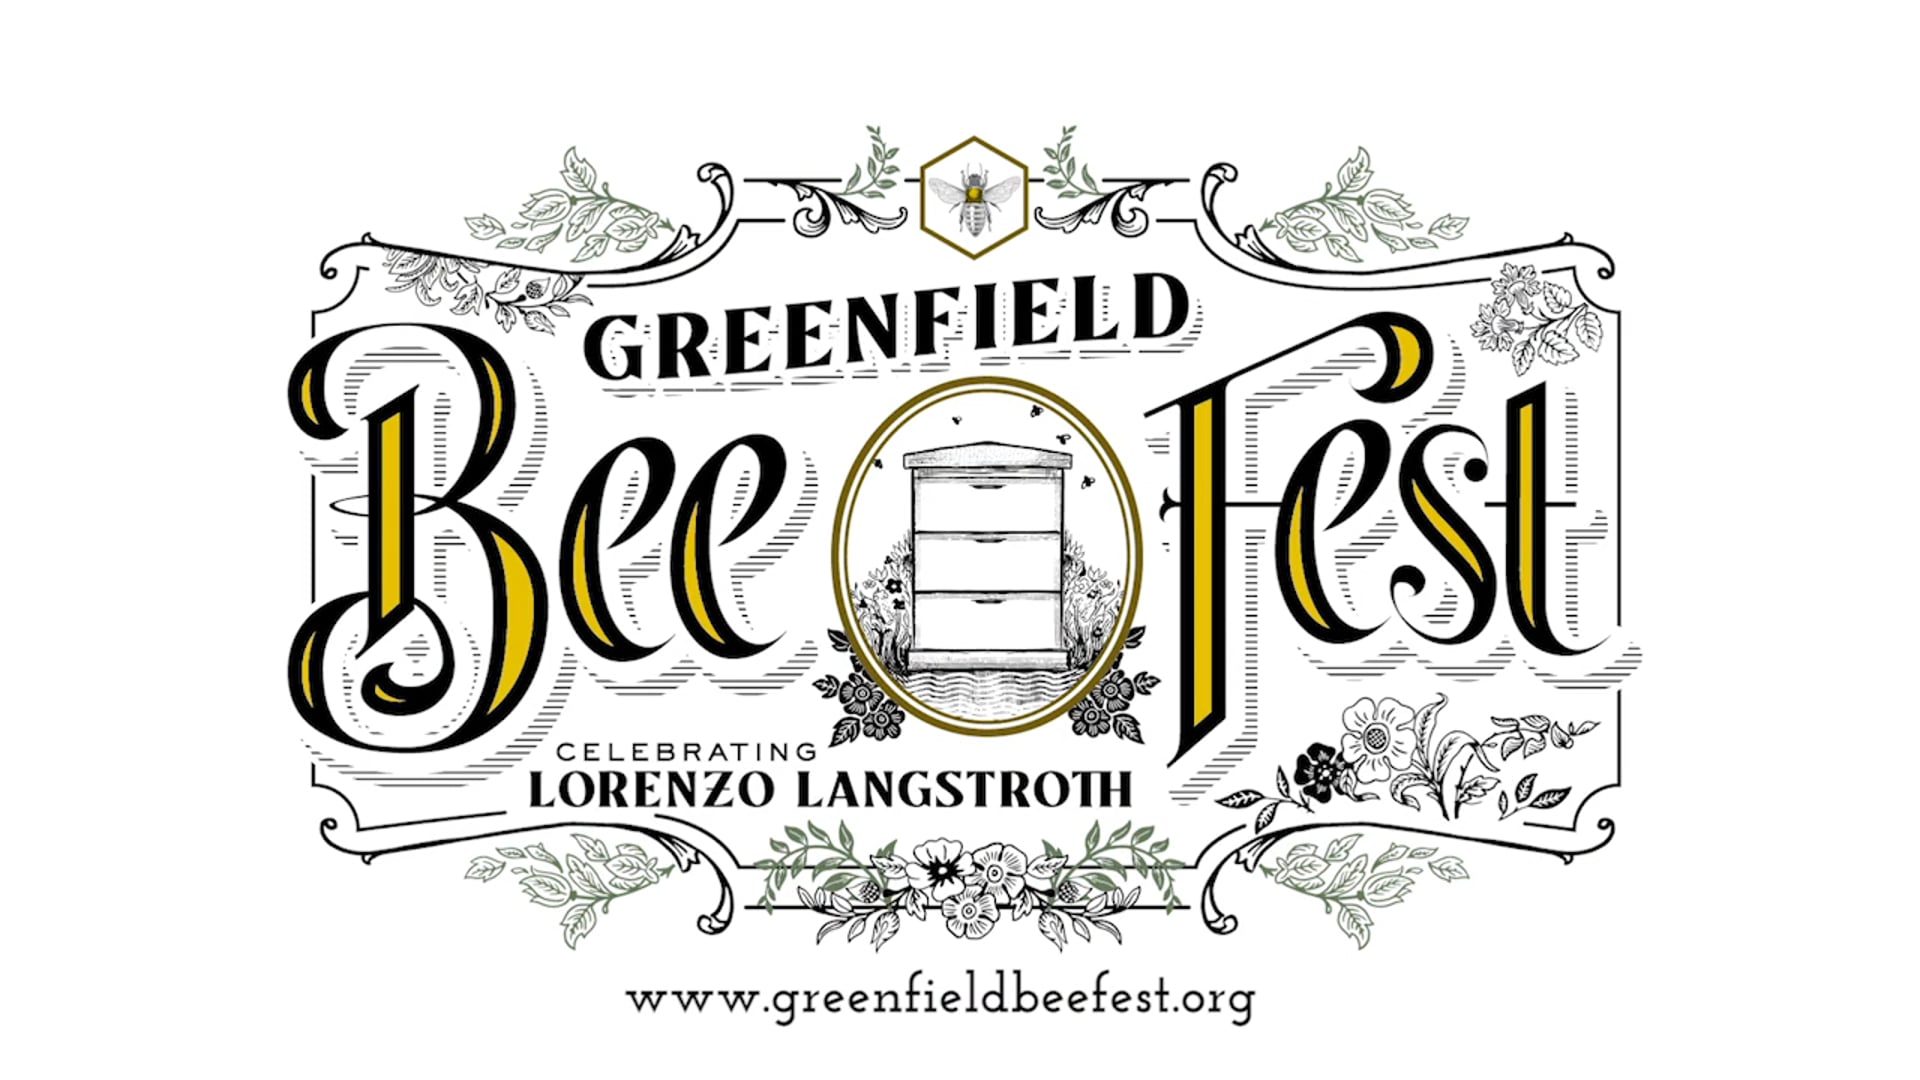 The Greenfield Bee Fest: Celebrating Lorenzo Langstroth